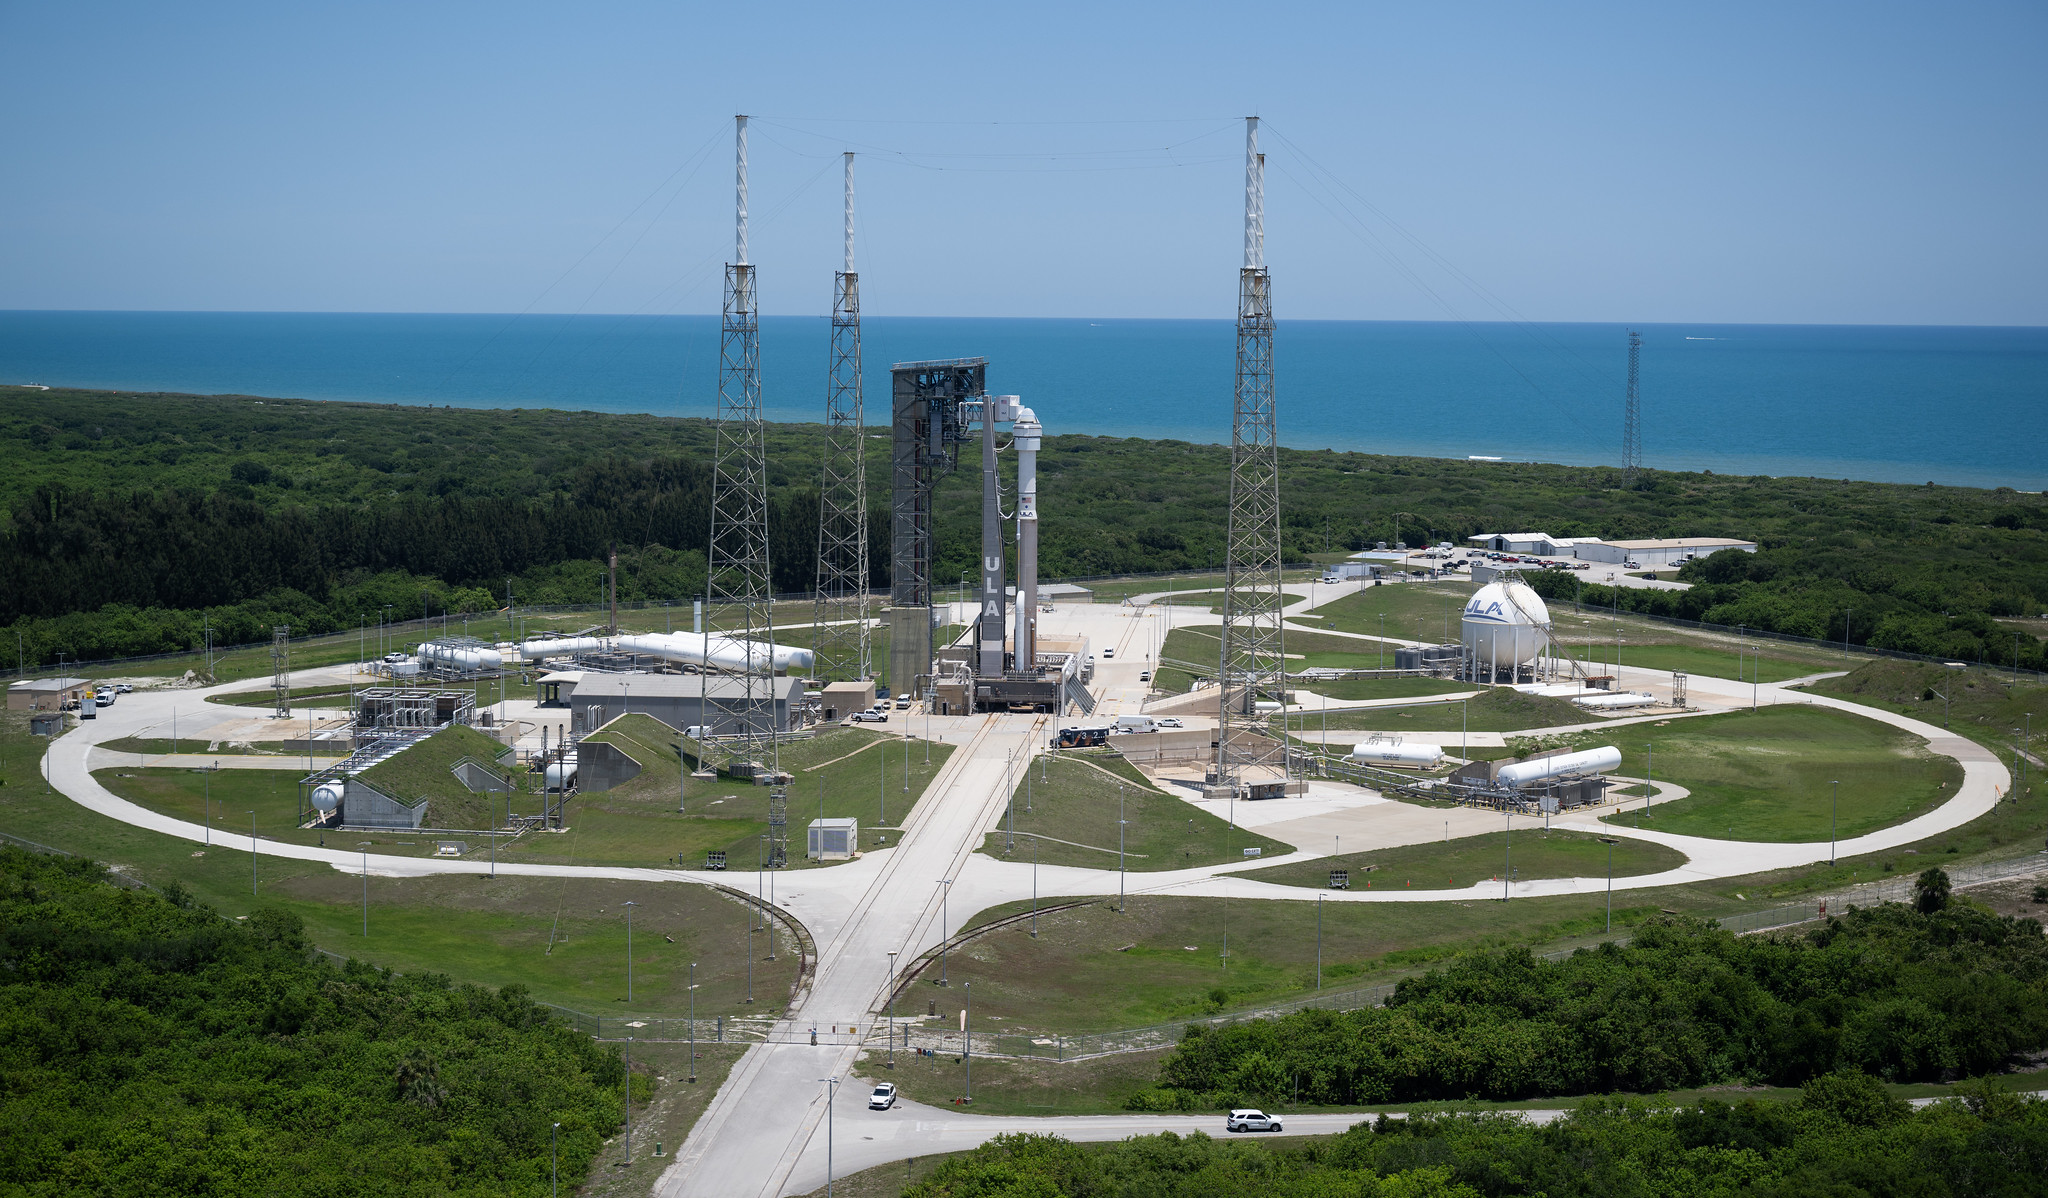 Starliner ready for next crewed test flight launch attempt thumbnail